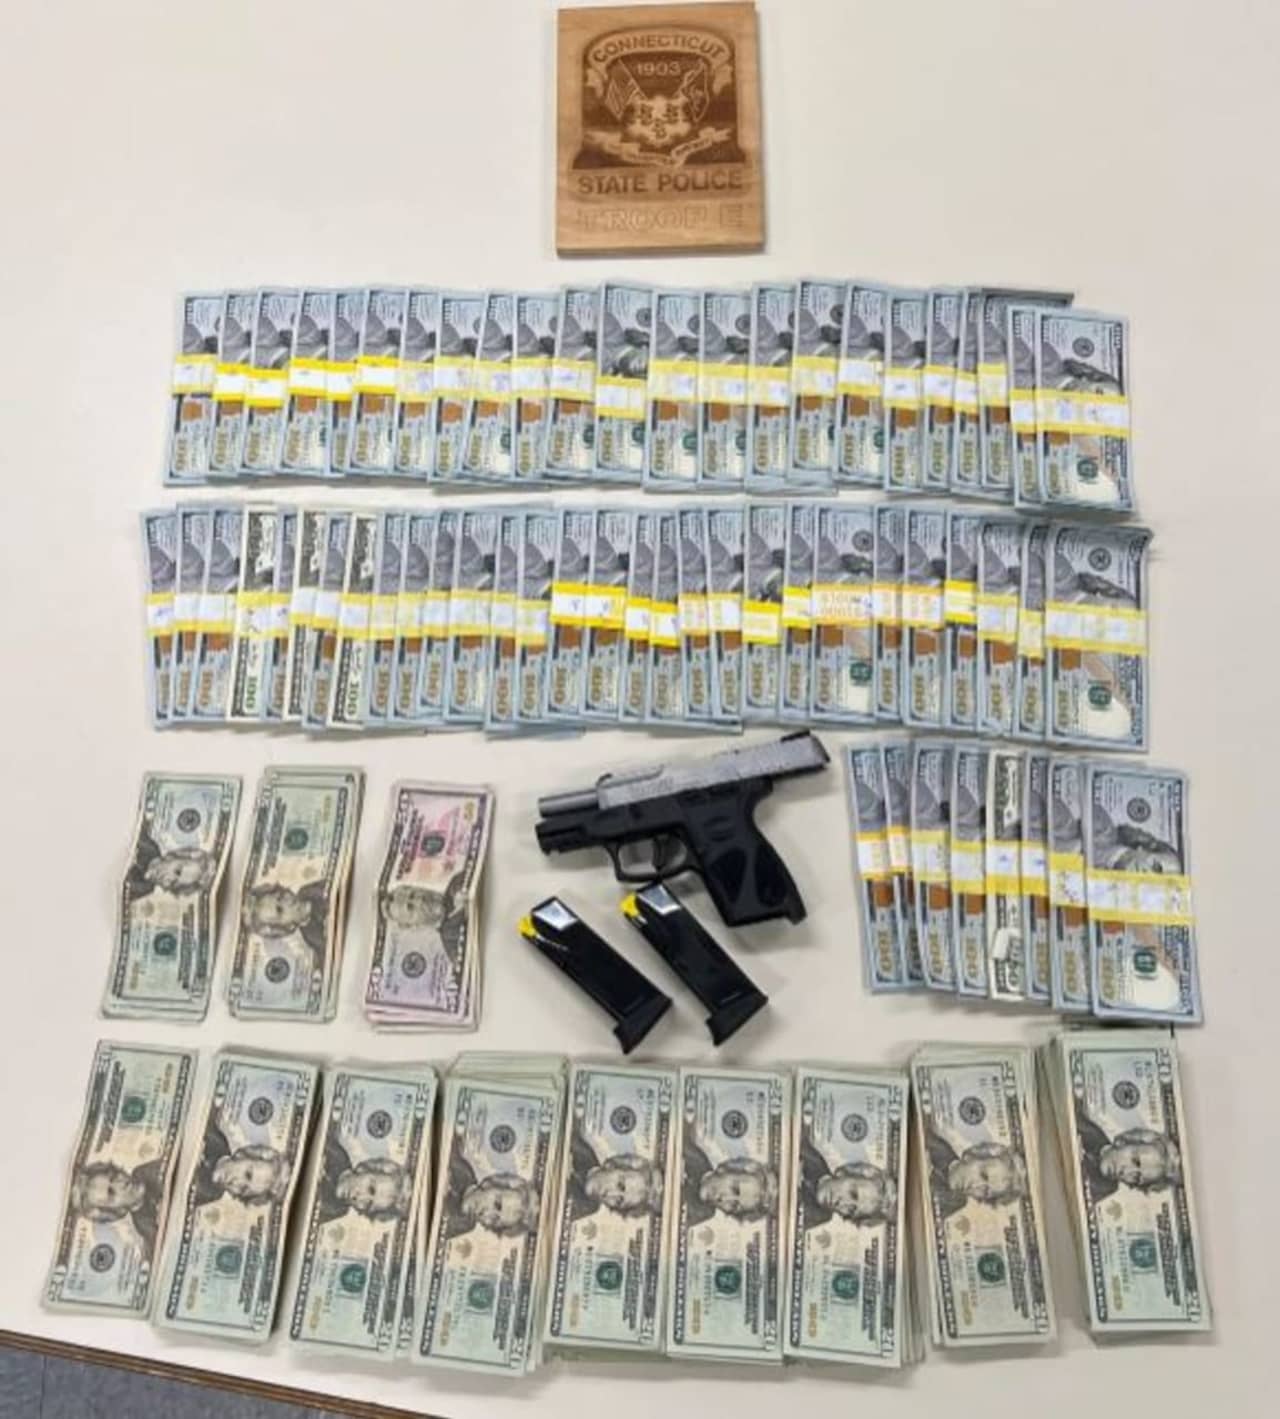 A wanted man was taken into custody after police said he was pulled over while driving a tractor-trailer in Waterford that contained a loaded pistol and $70,000 in cash.